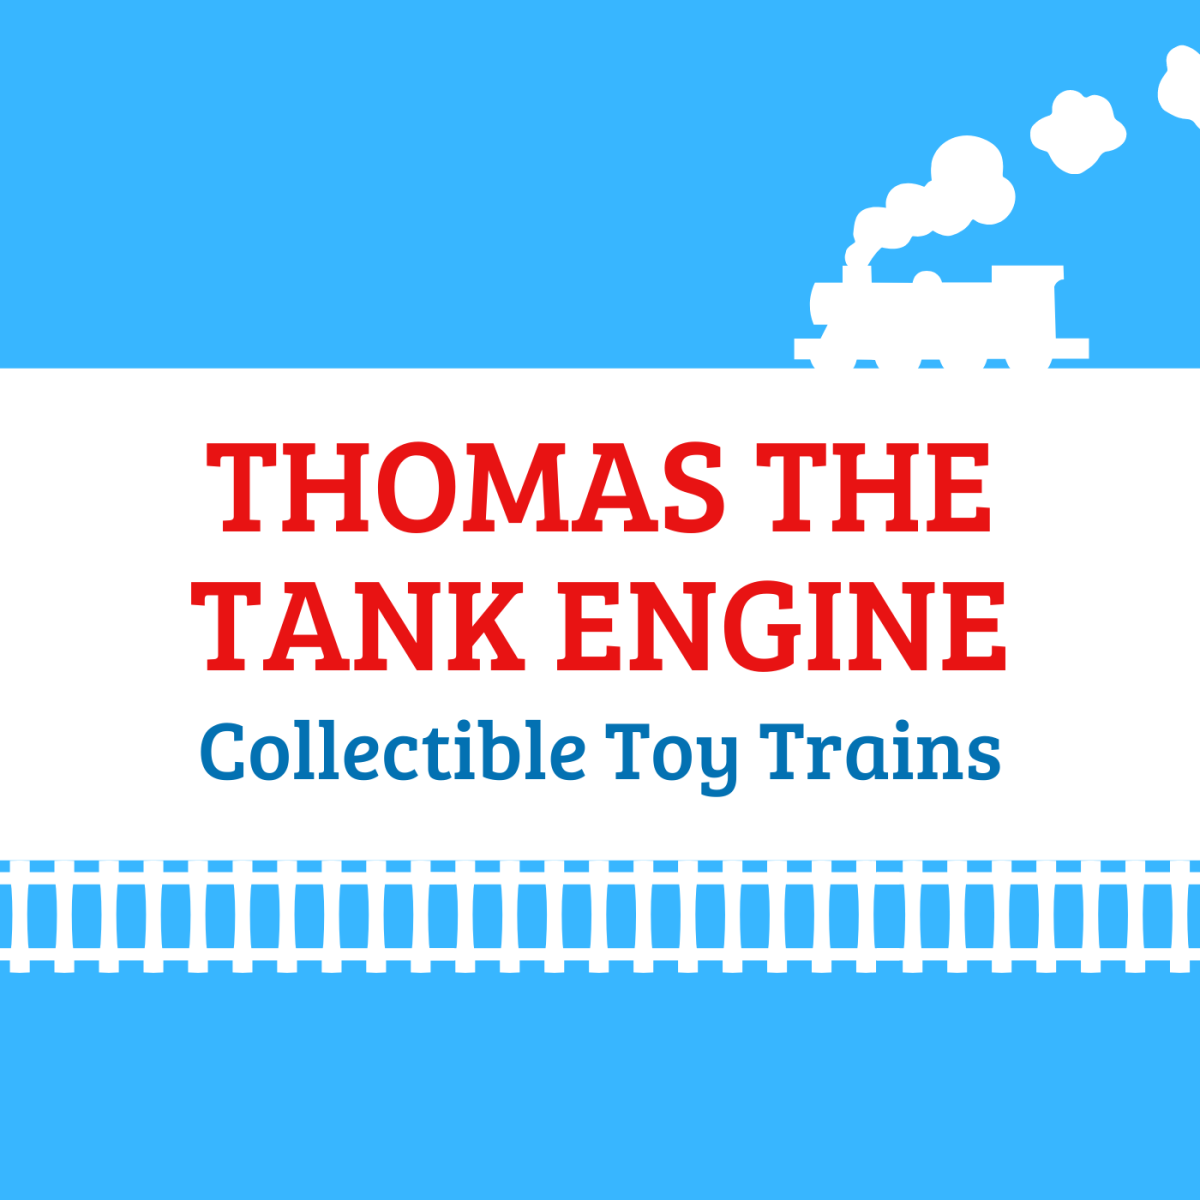 Are you a Thomas train collector, or are you interested in starting a collection? Learn about the different types of trains available, and discover which ones might be worth something.